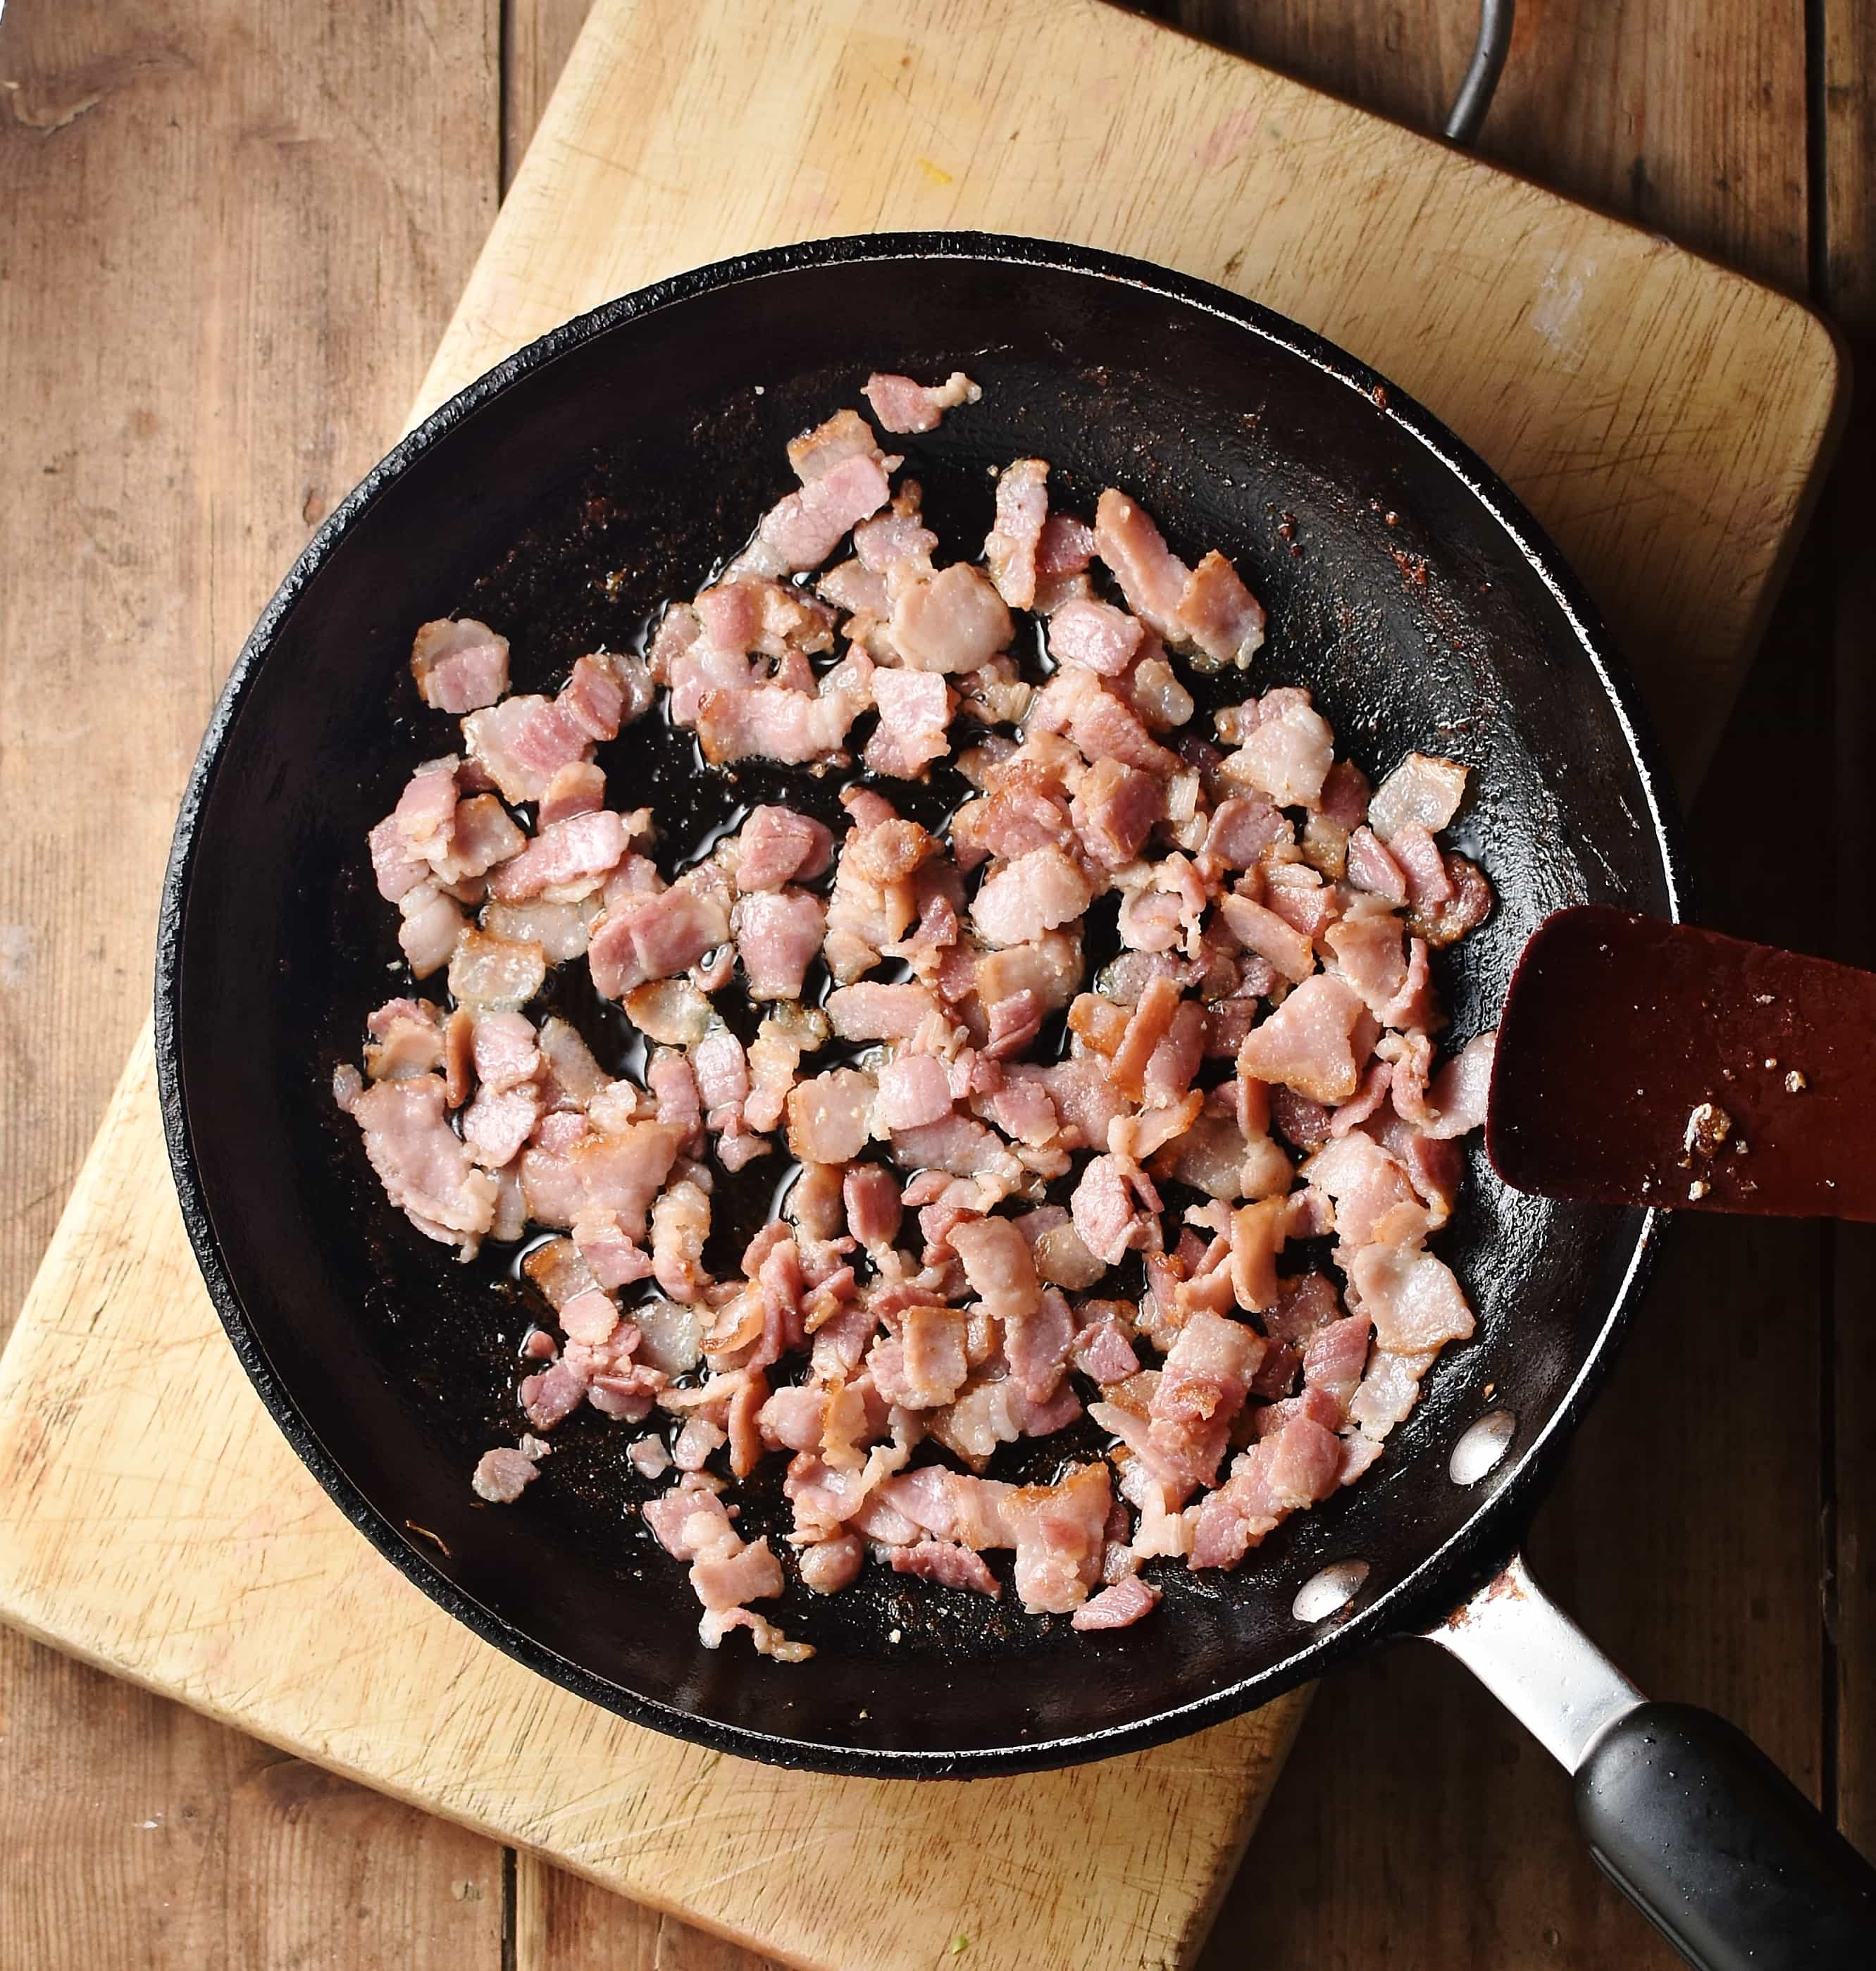 Bacon pieces in skillet on top of wooden board.